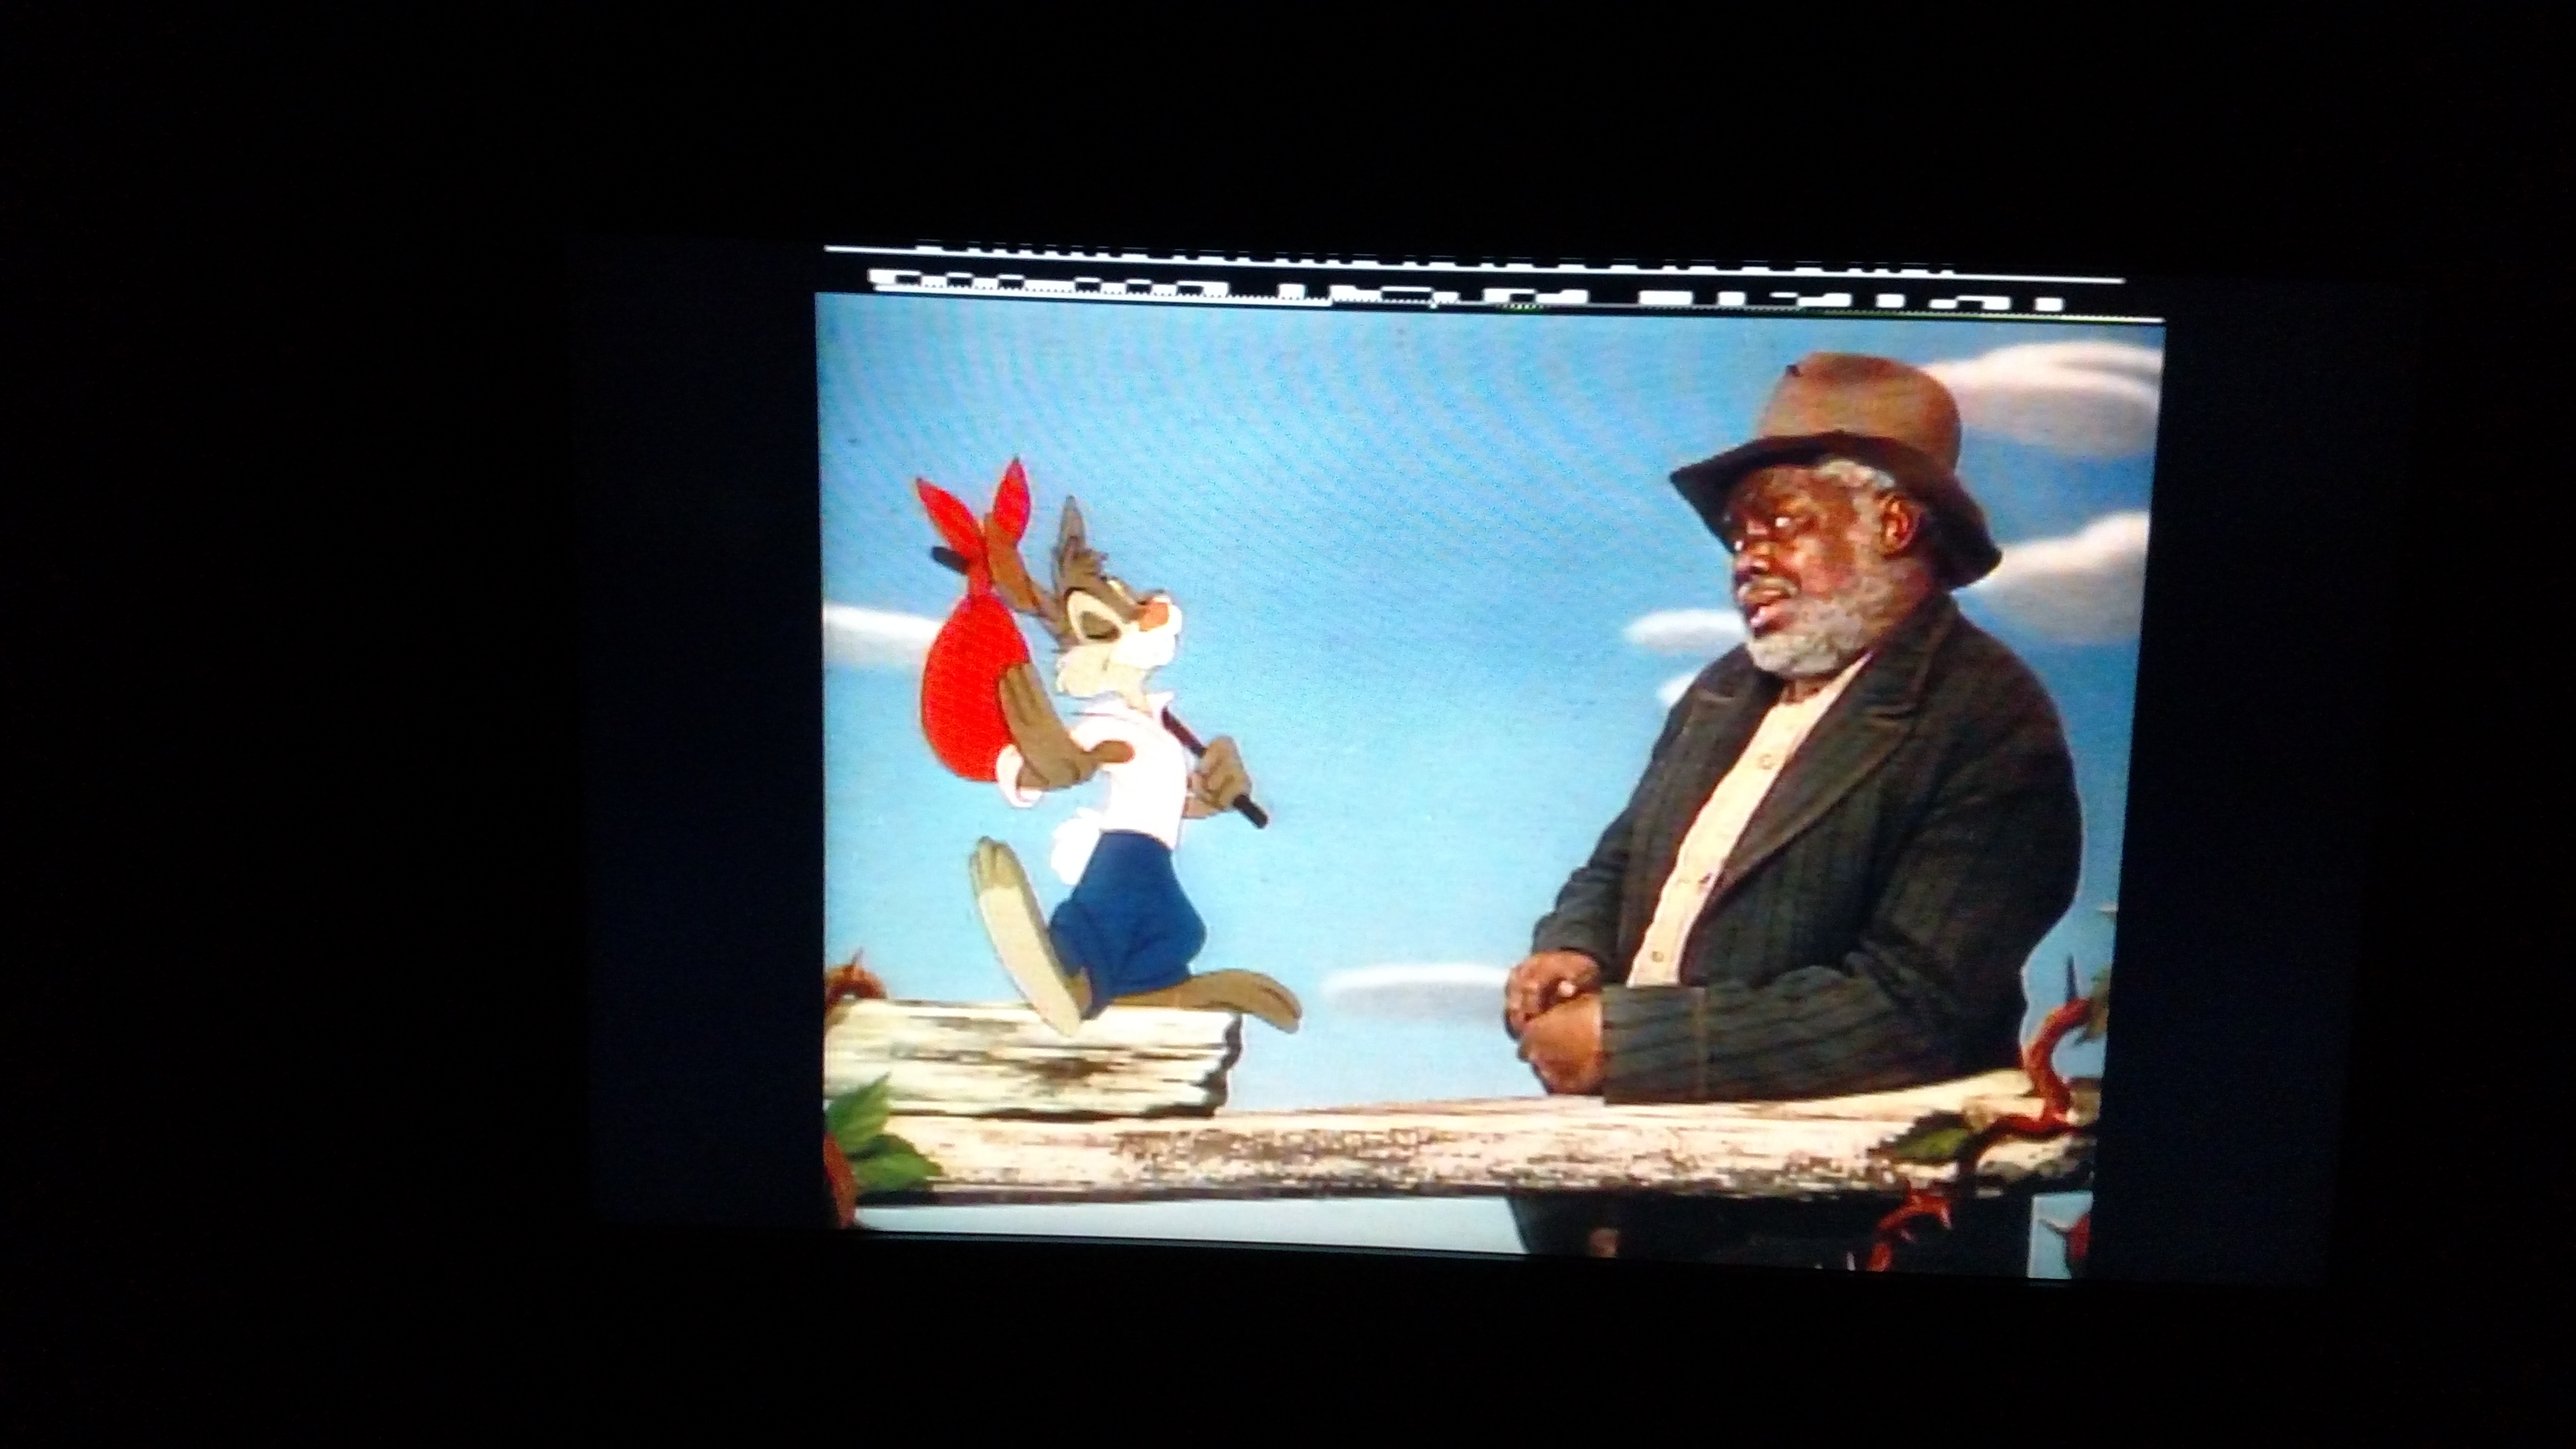 Disney's Song of the South on Laserdisc